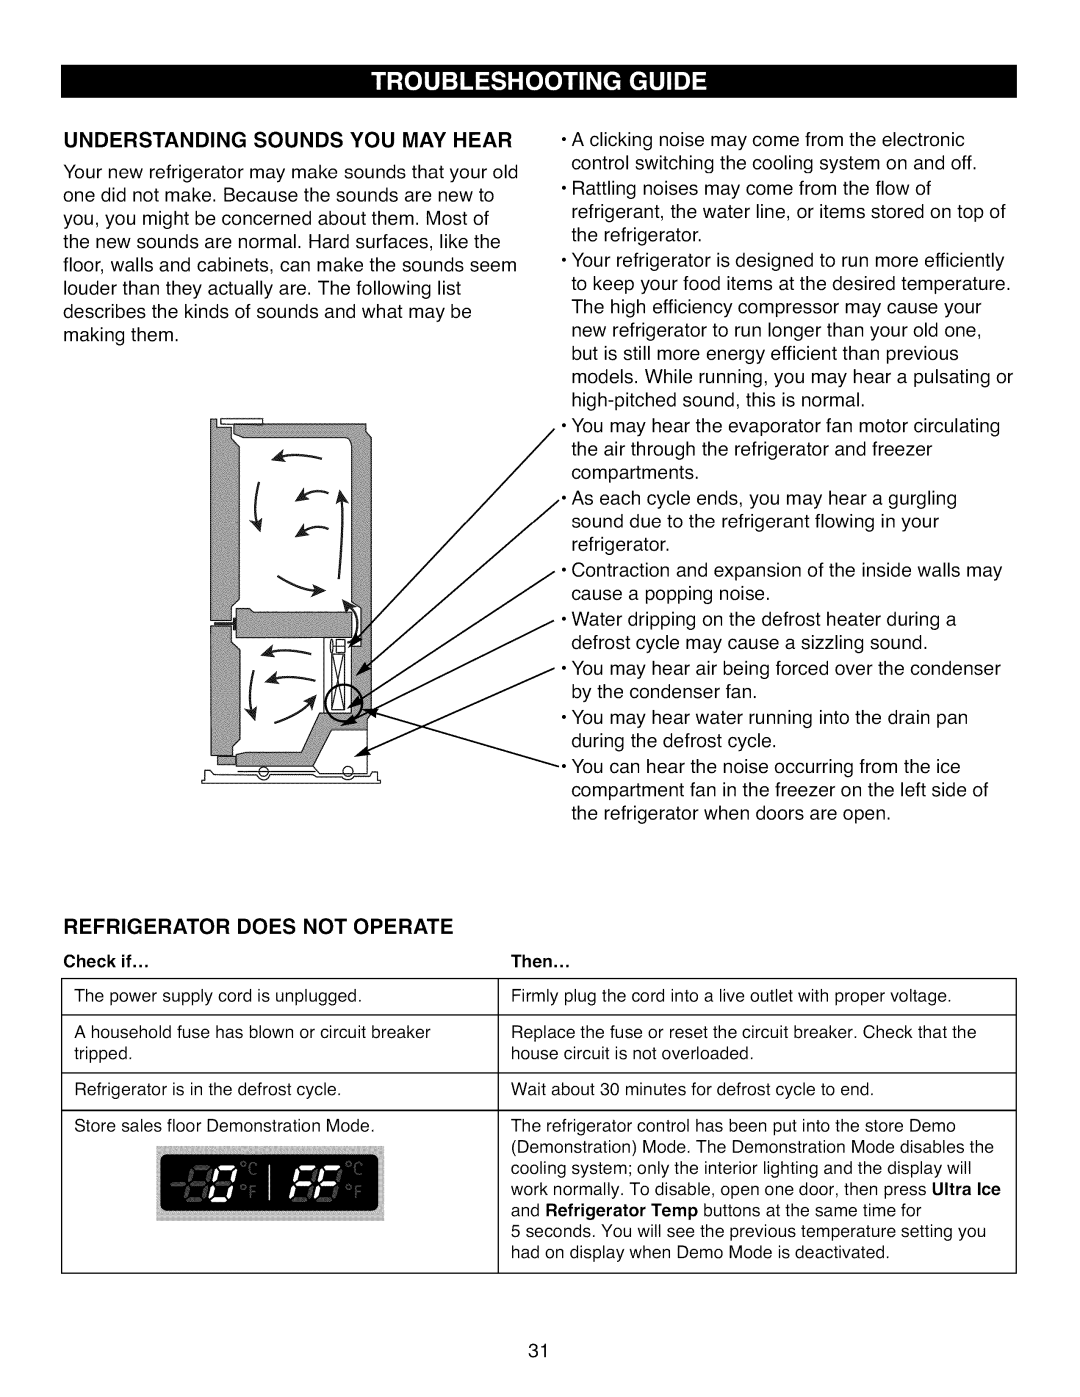 Kenmore 795.7104 manual Understanding Sounds You May Hear, REFRIGERATOR DOES NOT OPERATE Check if, Then 